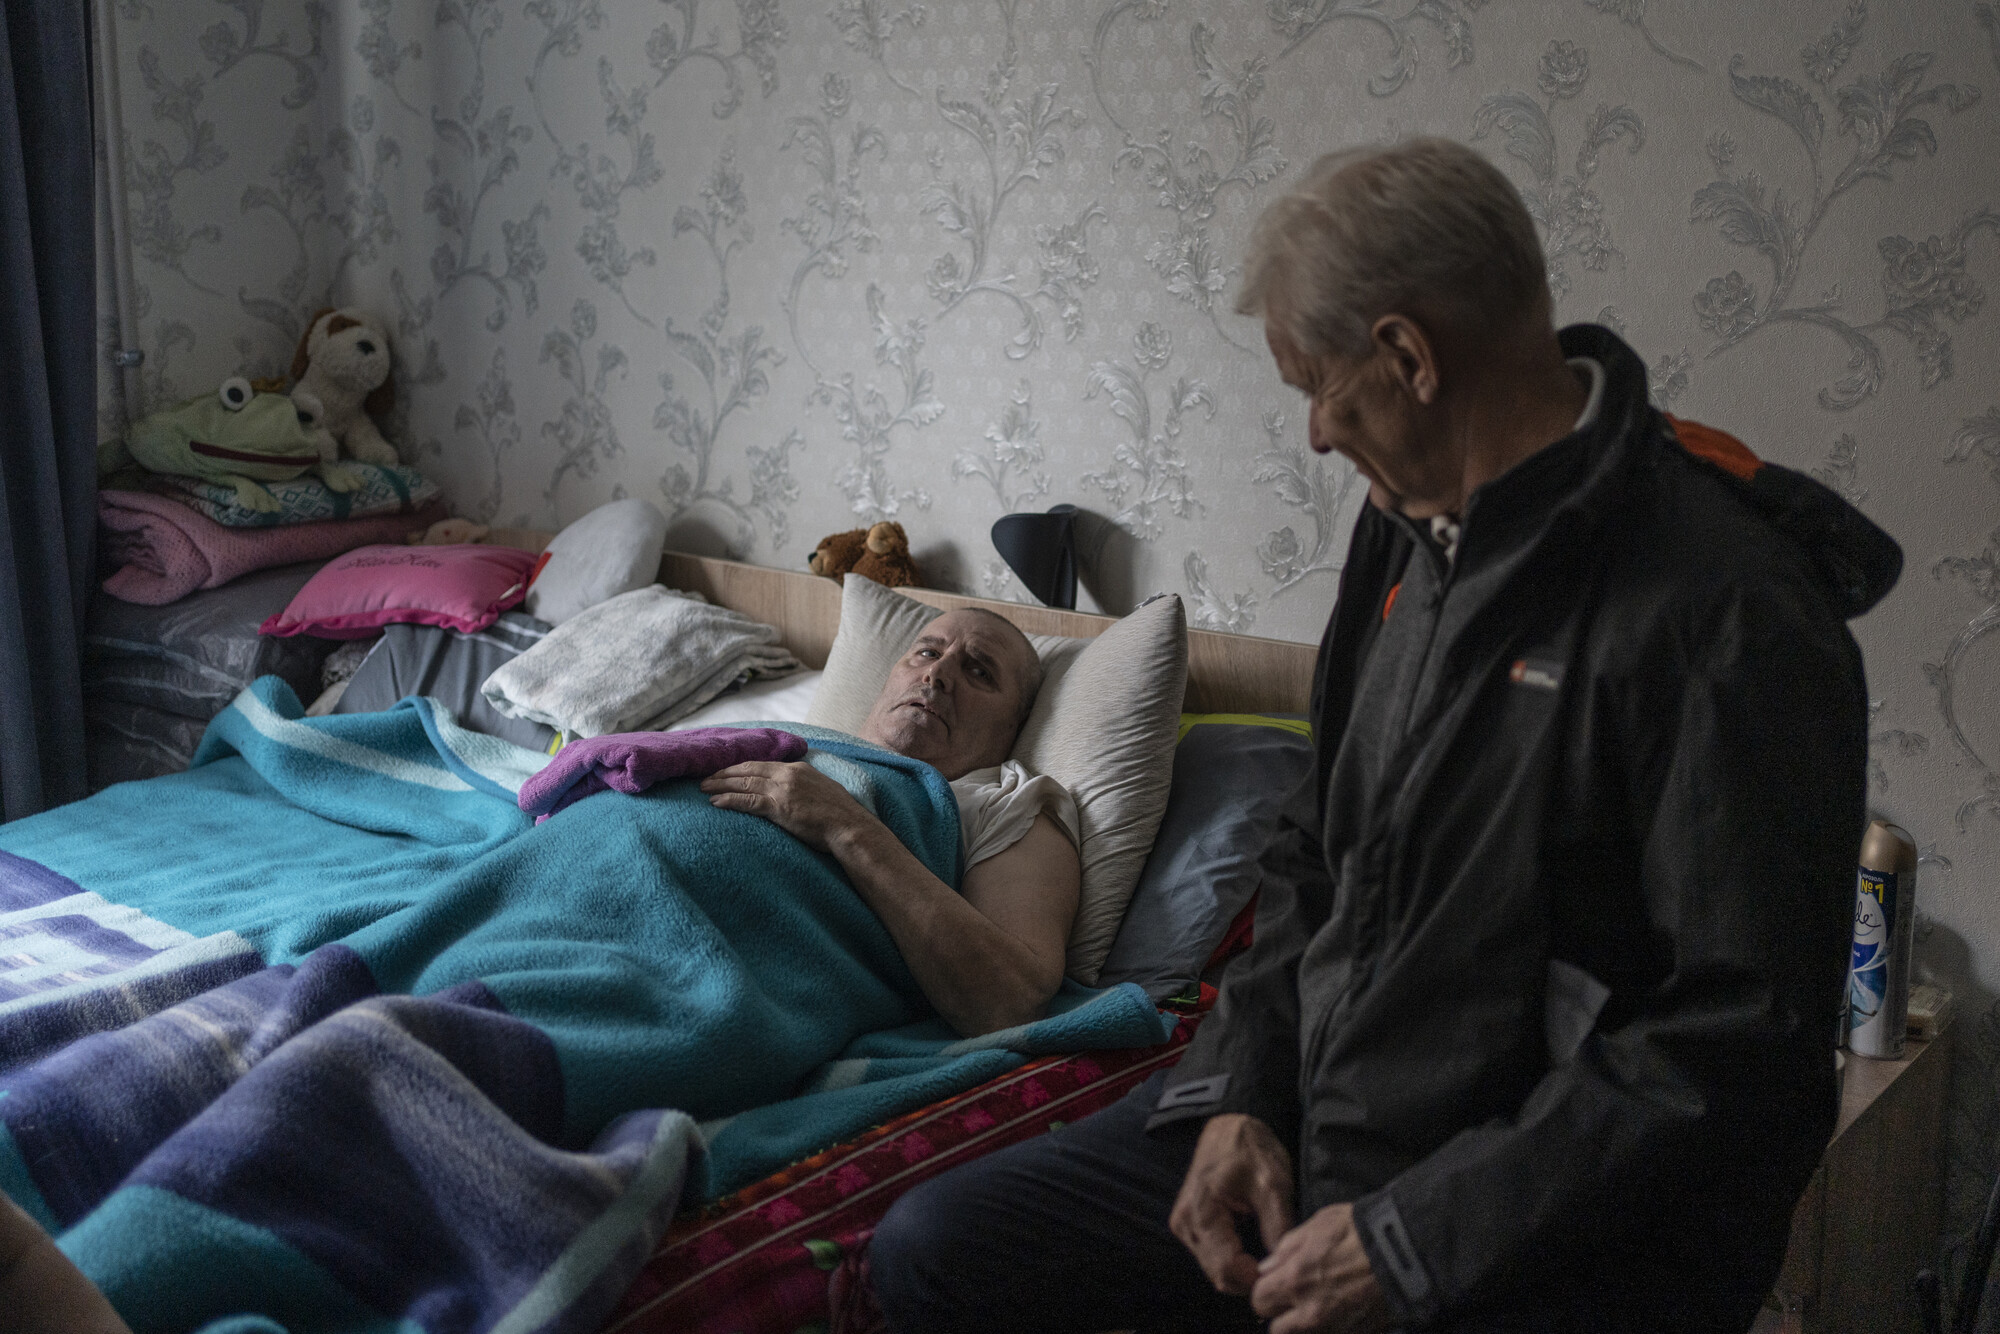 Jan Egeland's visit to IPD collective center in Dnipro, Ukraine. Serhii is from Donetsk. NRC rebuilt his house after it was attacked in 2016. This year, it was destroyed again by Russian rockets. His family fled on foot. Serhii had a stroke just before the war. His family pushed him for 18 hours in a wheelchair to safety. Dnipro, 22 November 2022.